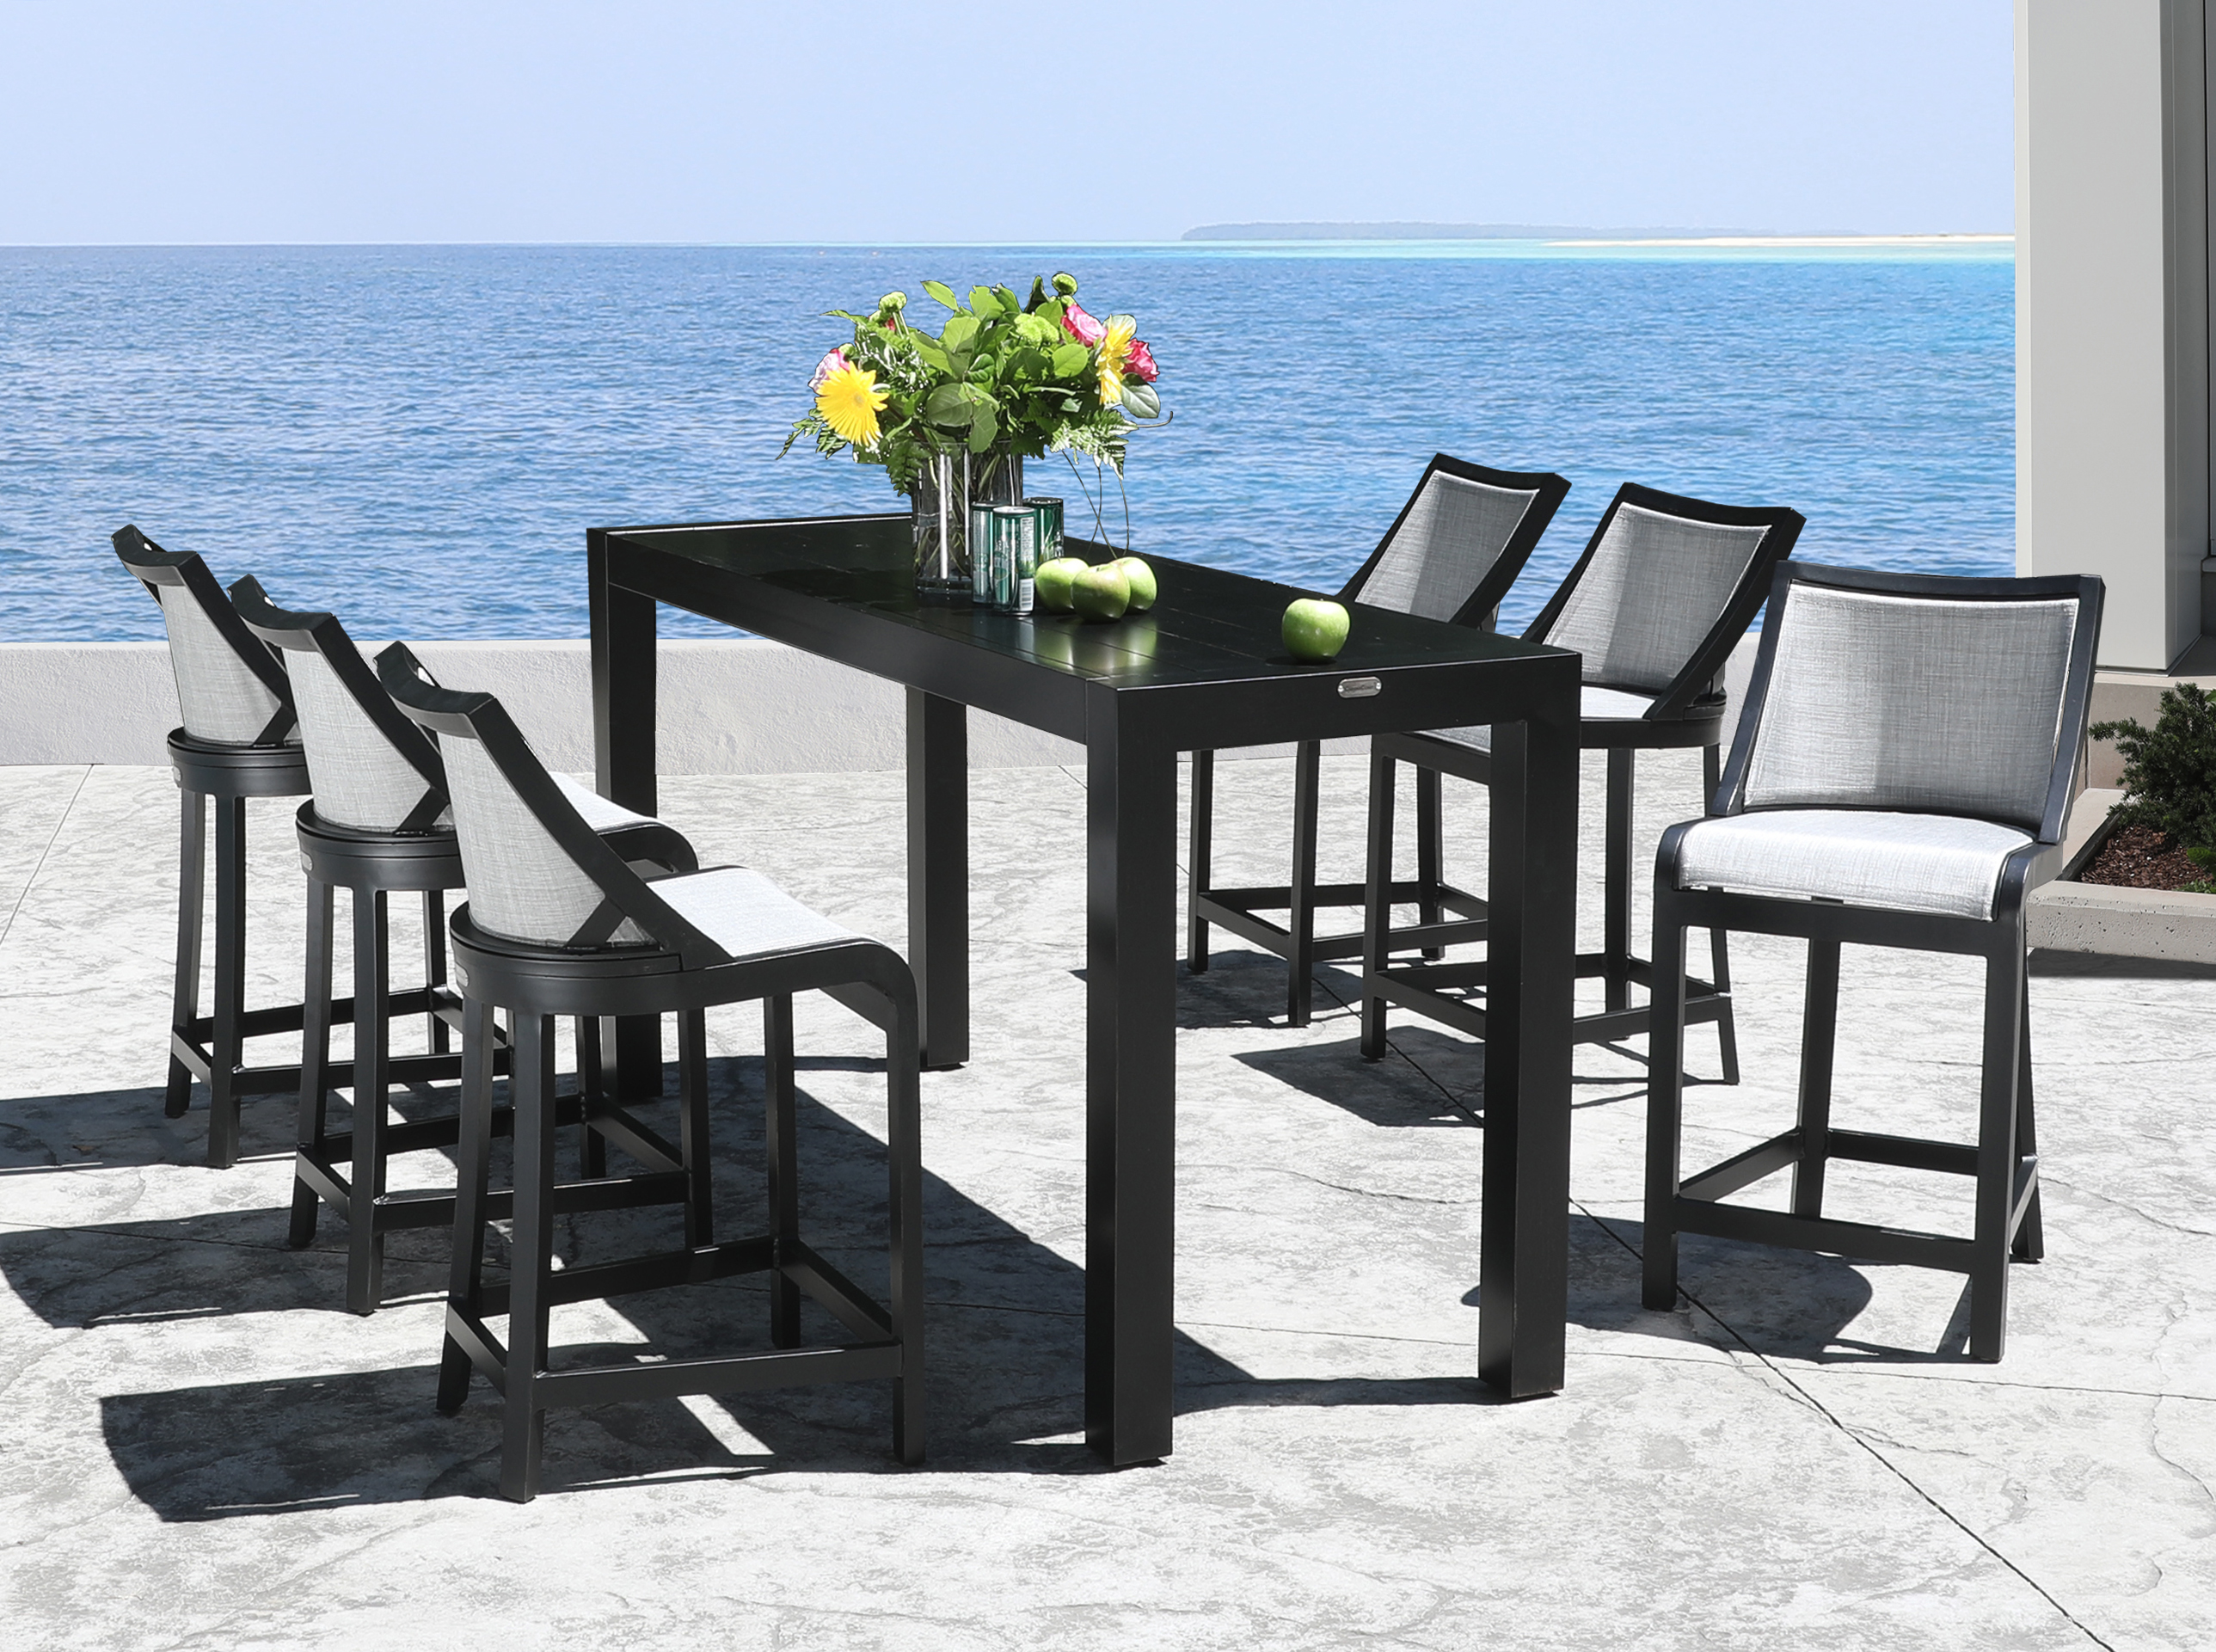 your need know guide before ing outdoor bar stool cabana cabanacoast sling stools pool furniture side table calgary strike exceptional modern style into any pattern dining kitchen